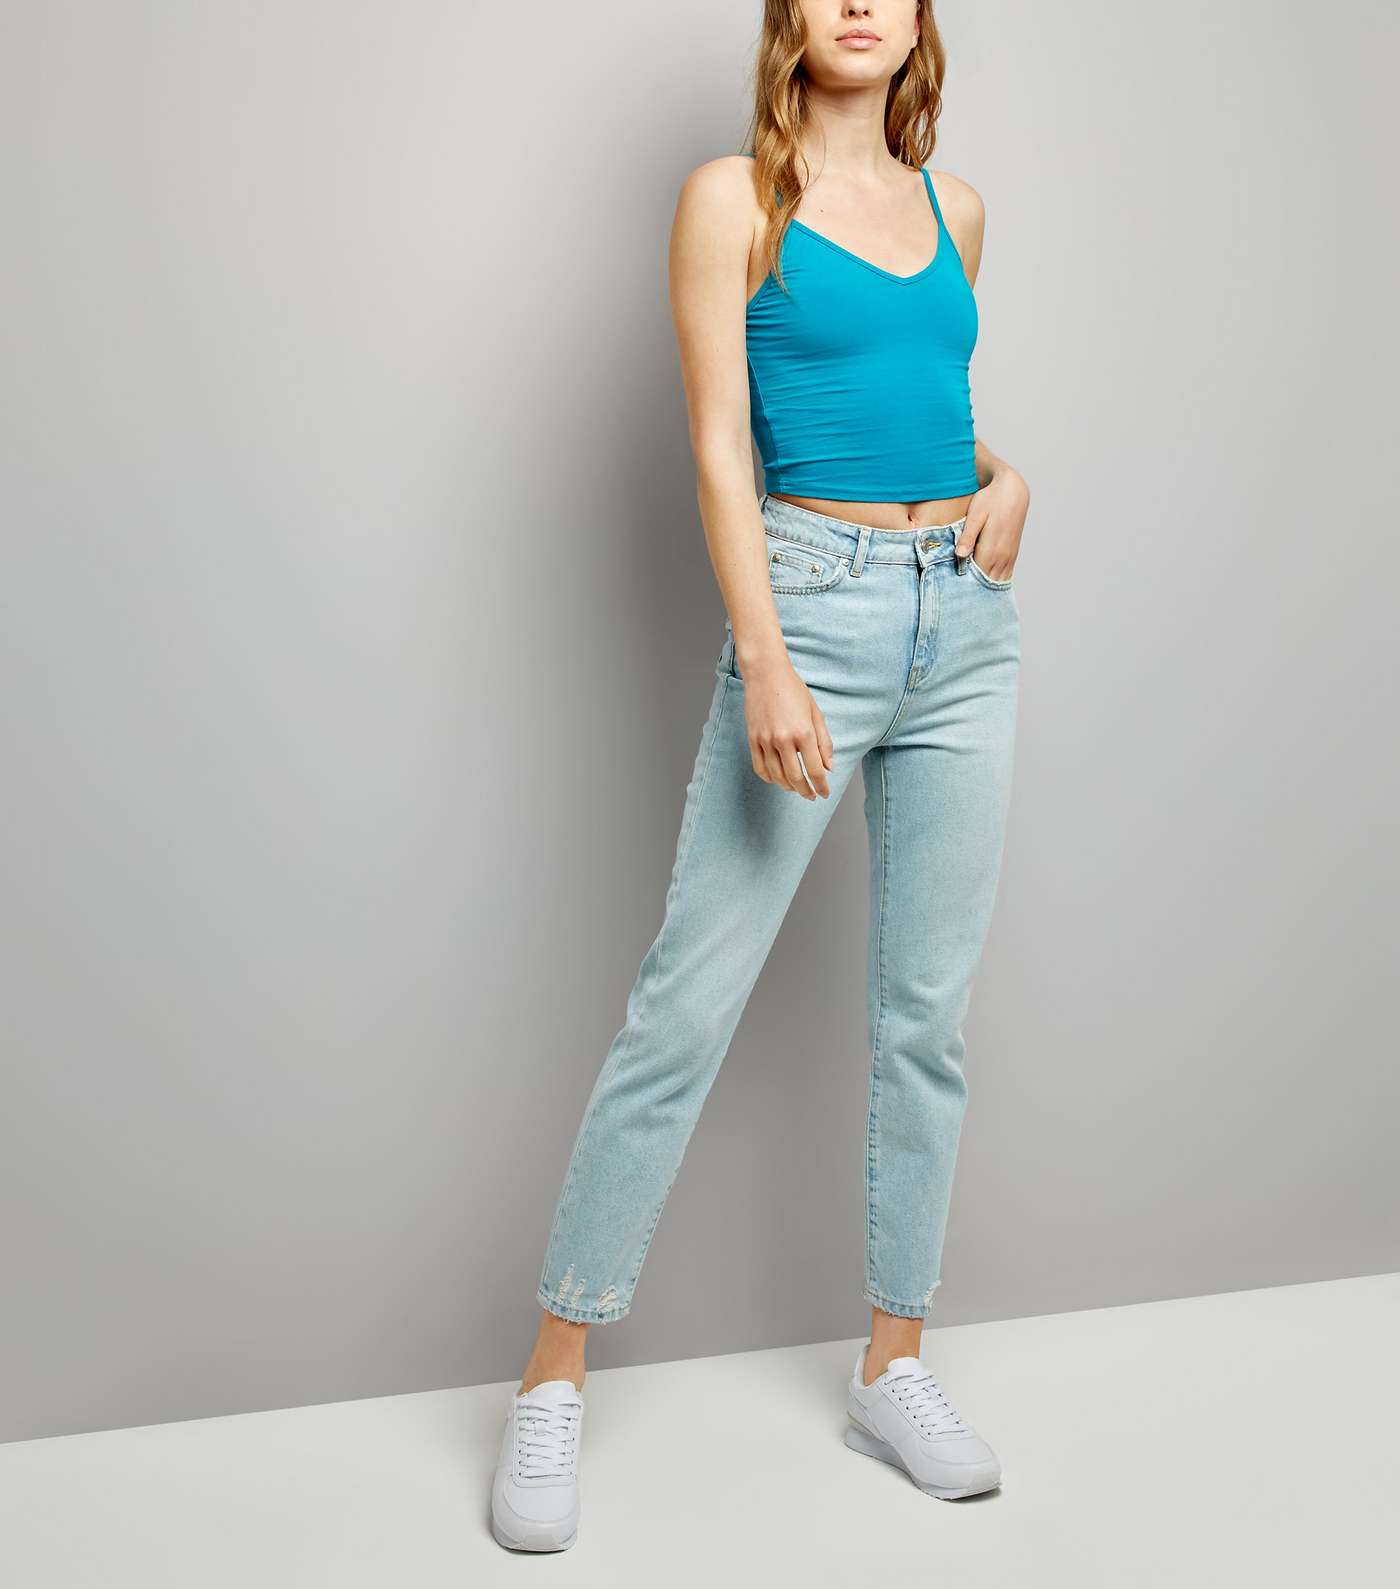 Turquoise V Neck Cropped Cami Top Image 2